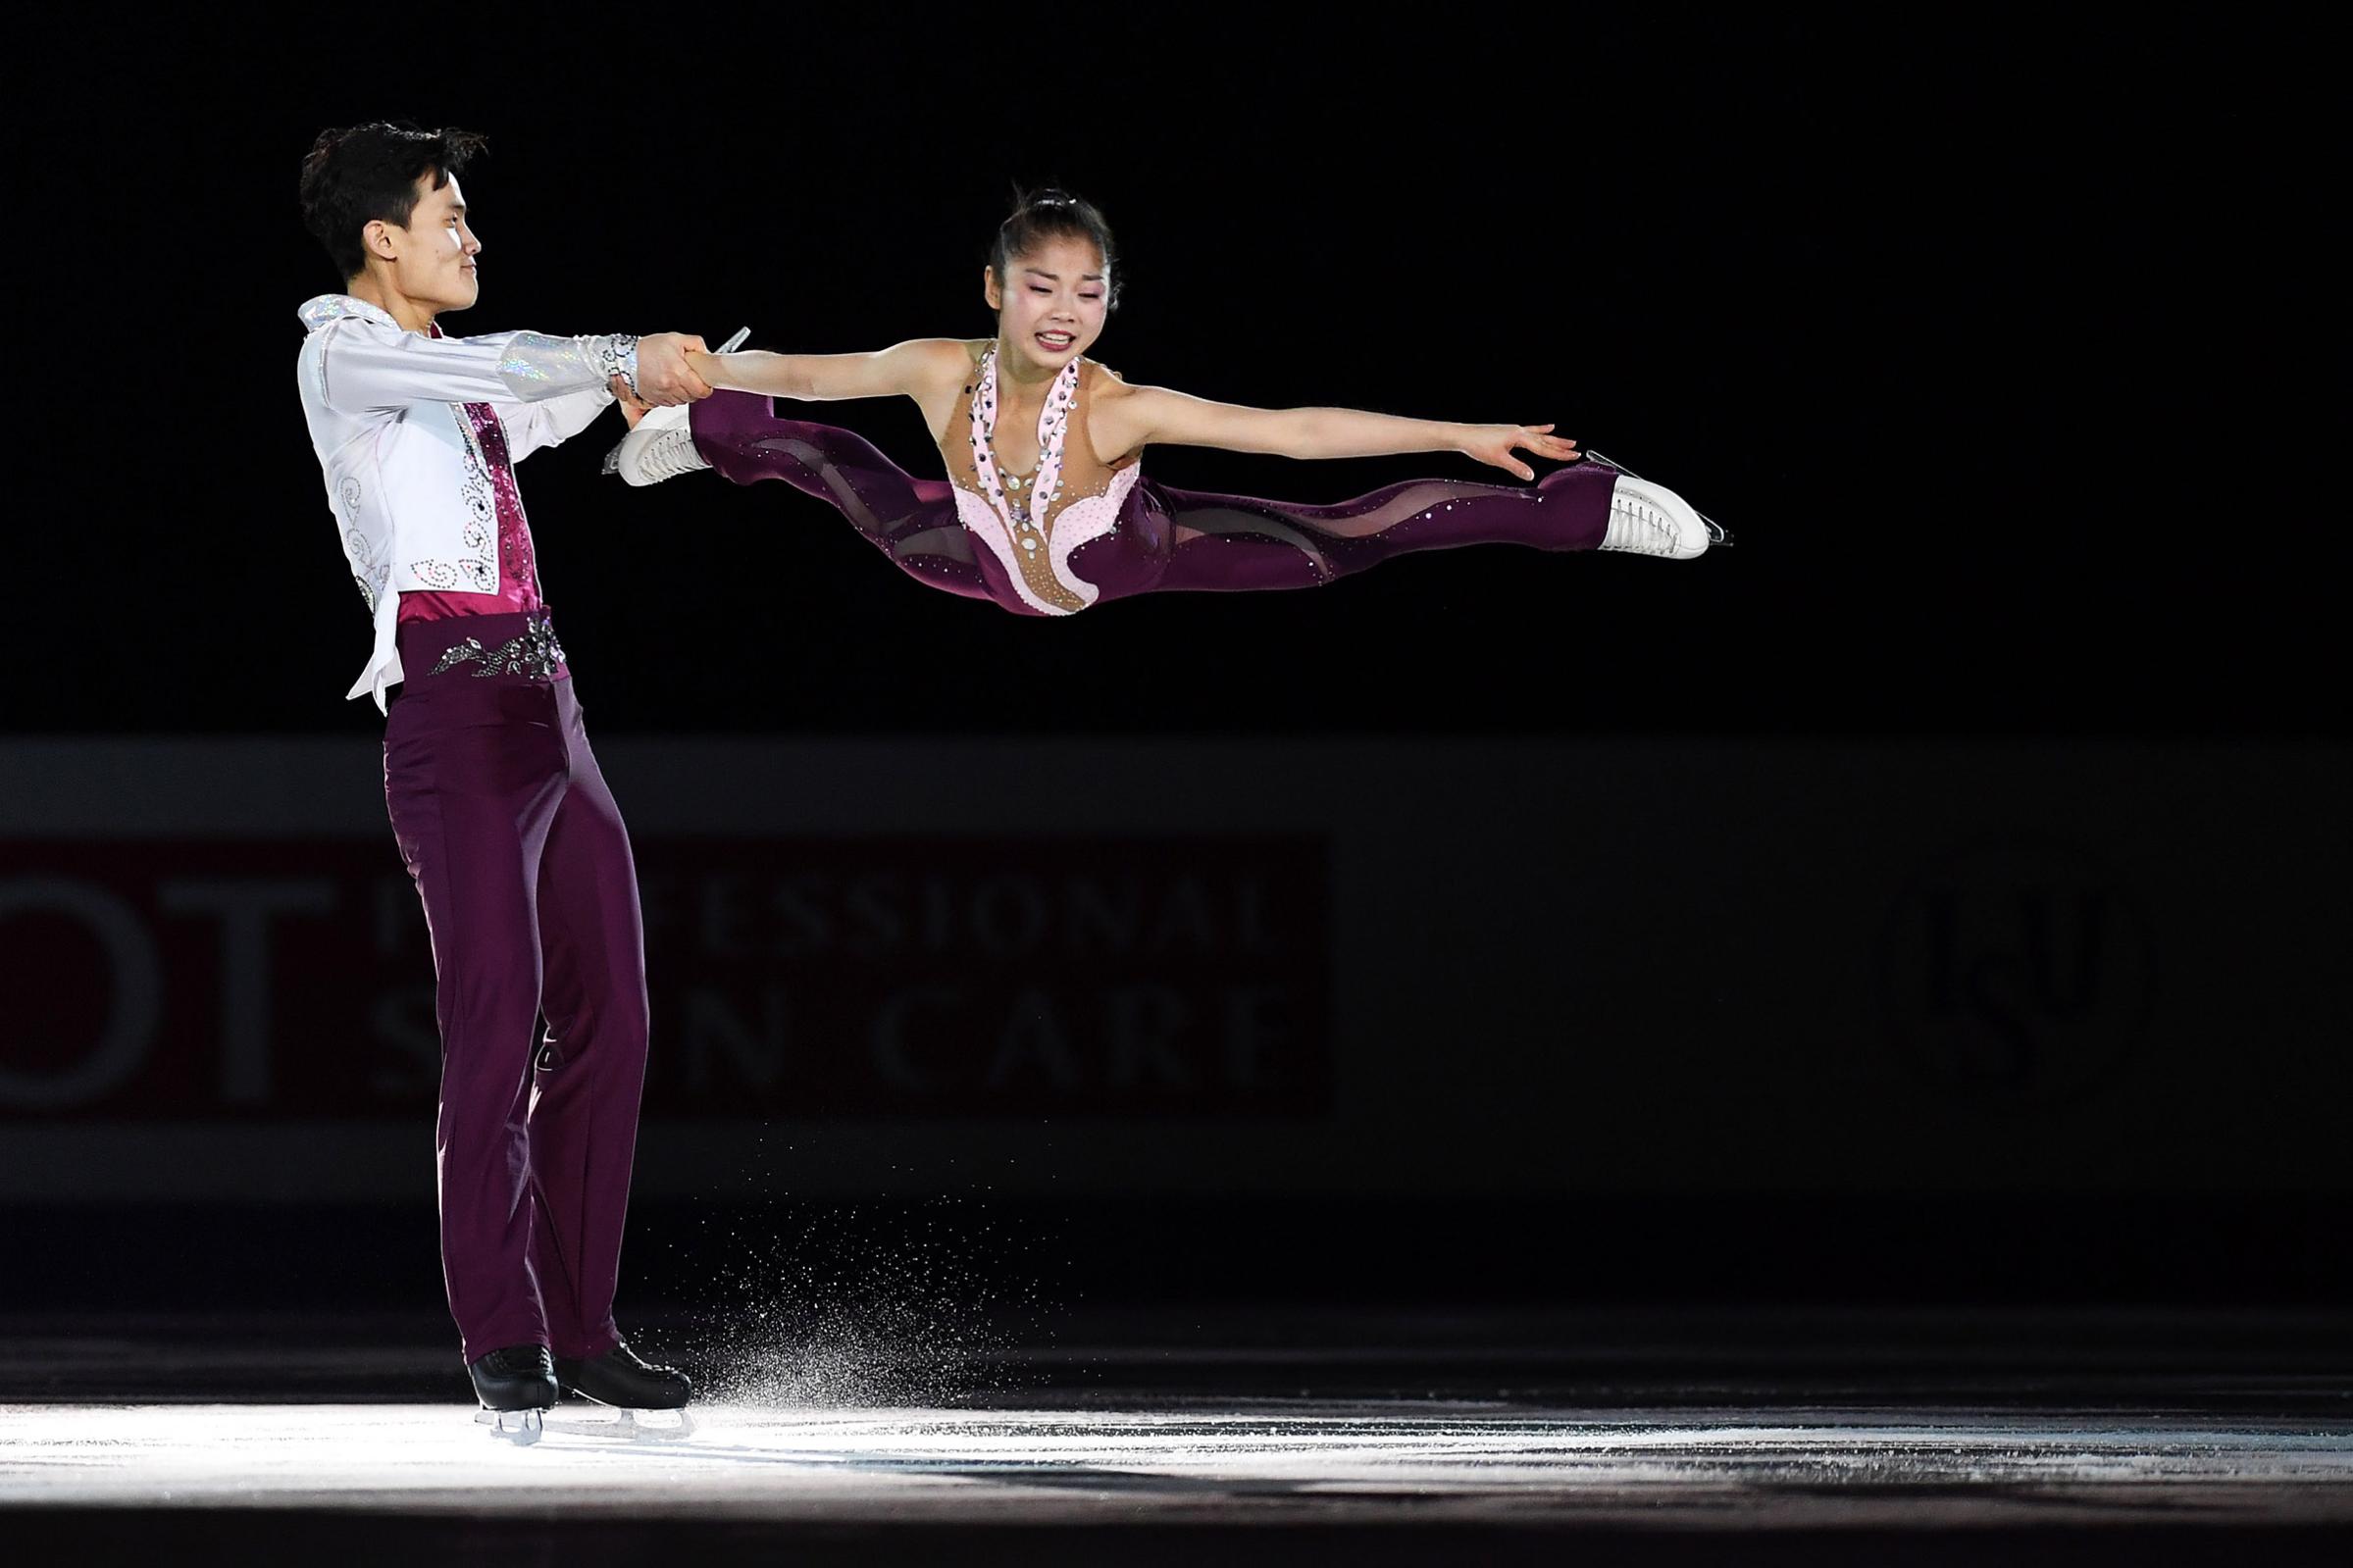 Tae Ok Ryom and Ju Sik Kim of North Korea perform their routine in the exhibition during day four of the Four Continents Figure Skating Championships at Taipei Arena in Taipei, Taiwan, on Jan. 27, 2018.